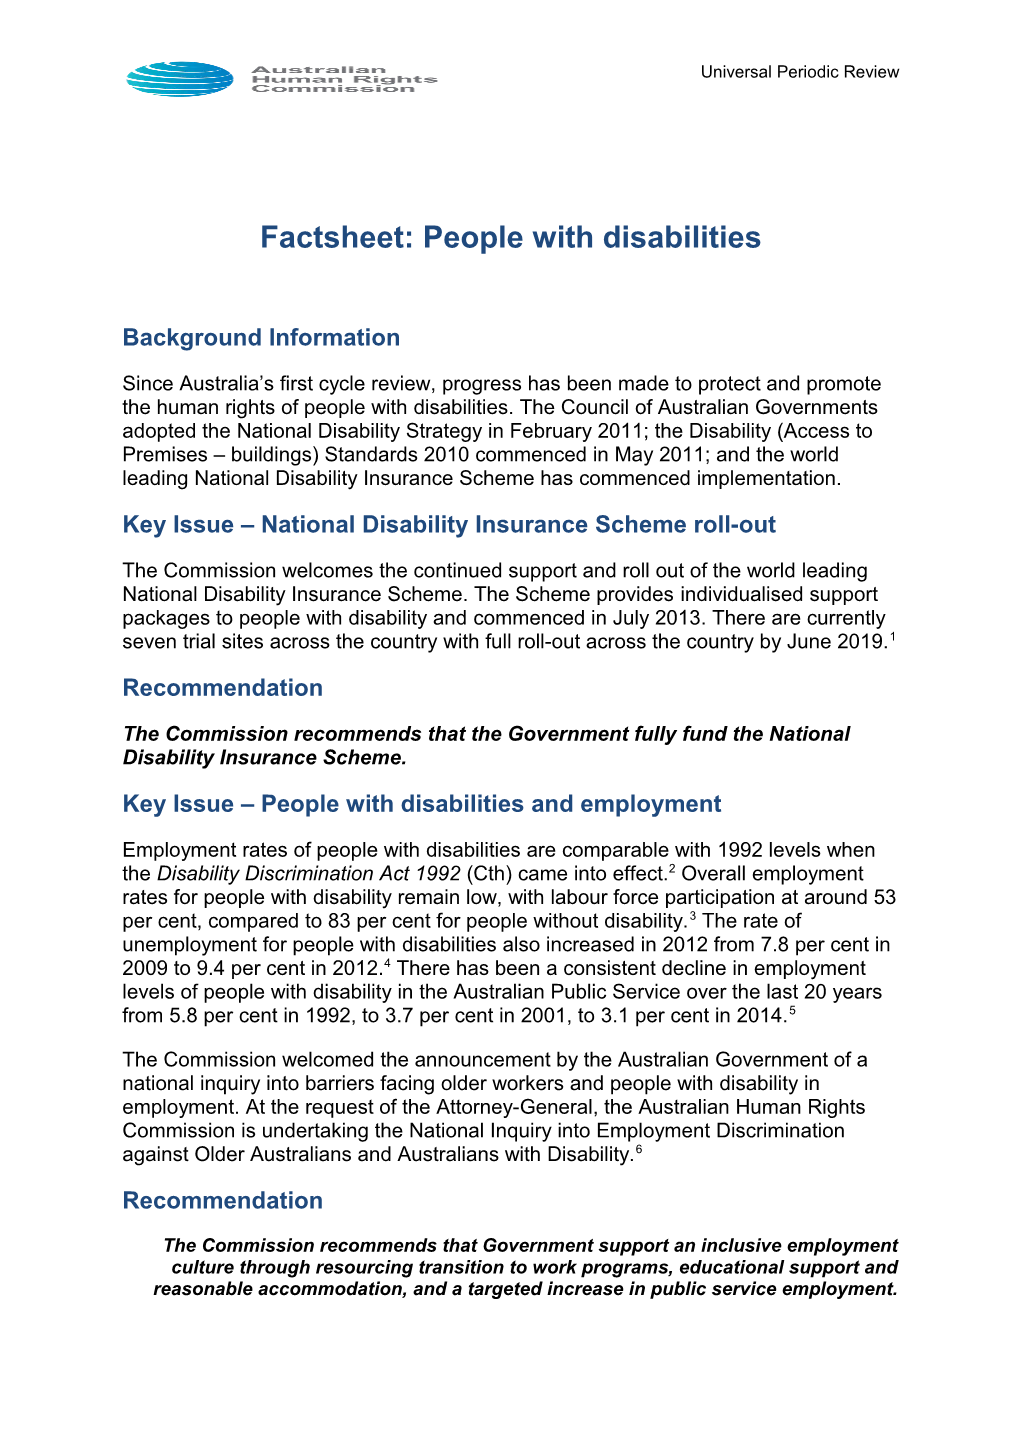 Factsheet: People with Disabilities